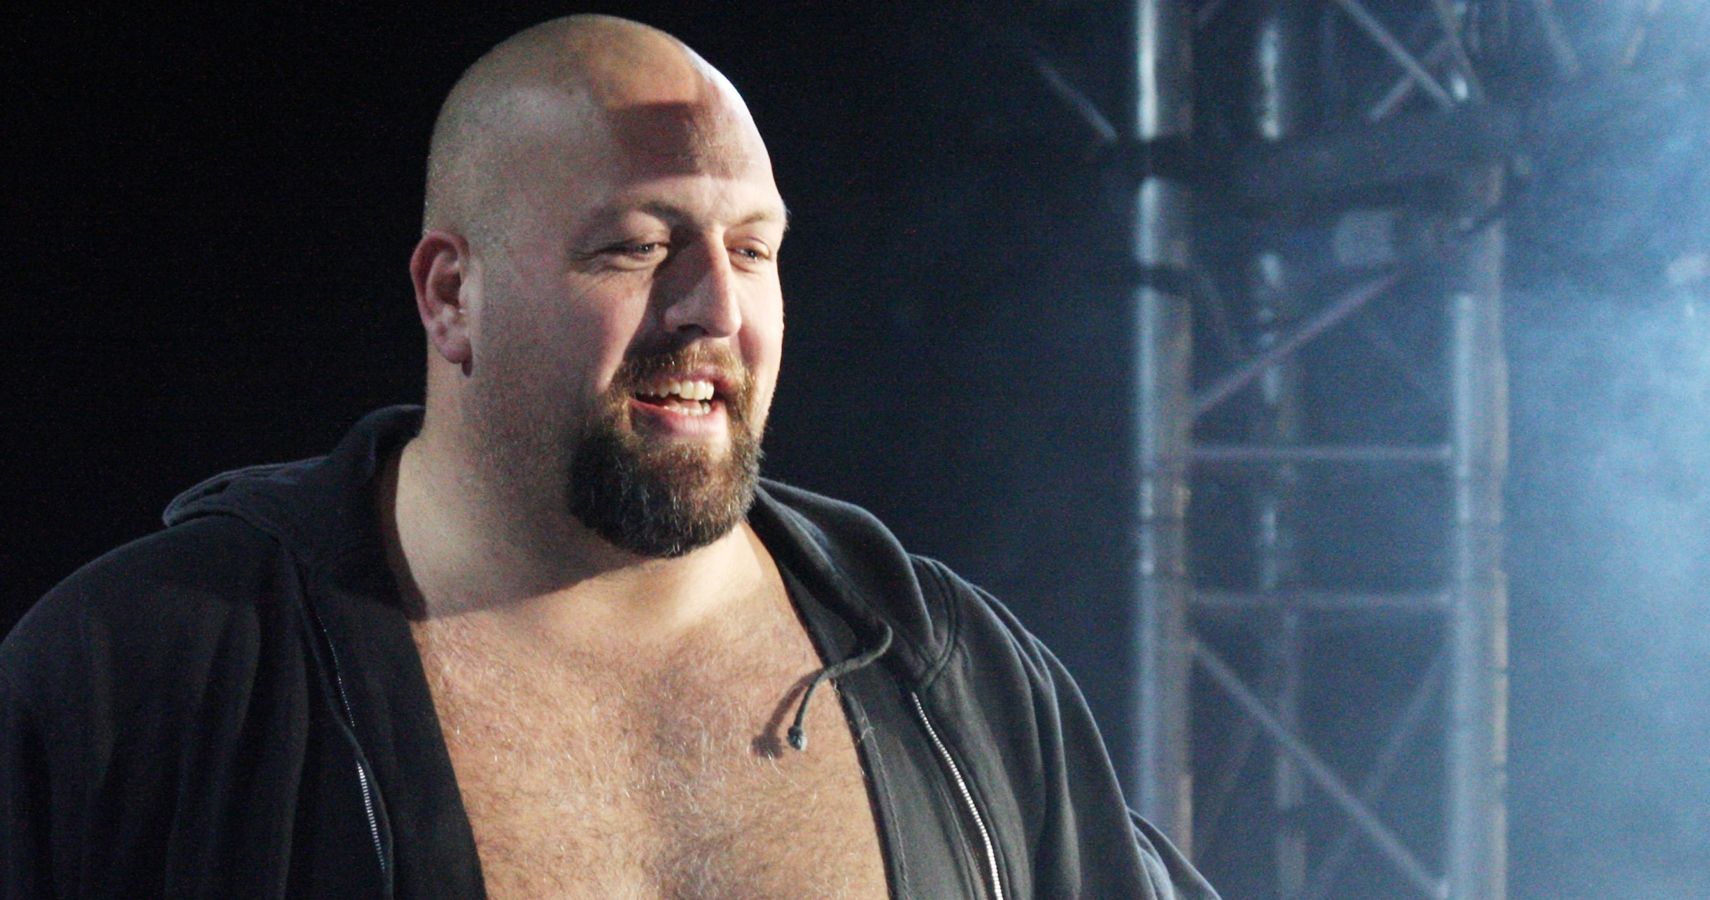 Big Show In AEW Opens The Door For A Celebrity Dream Match